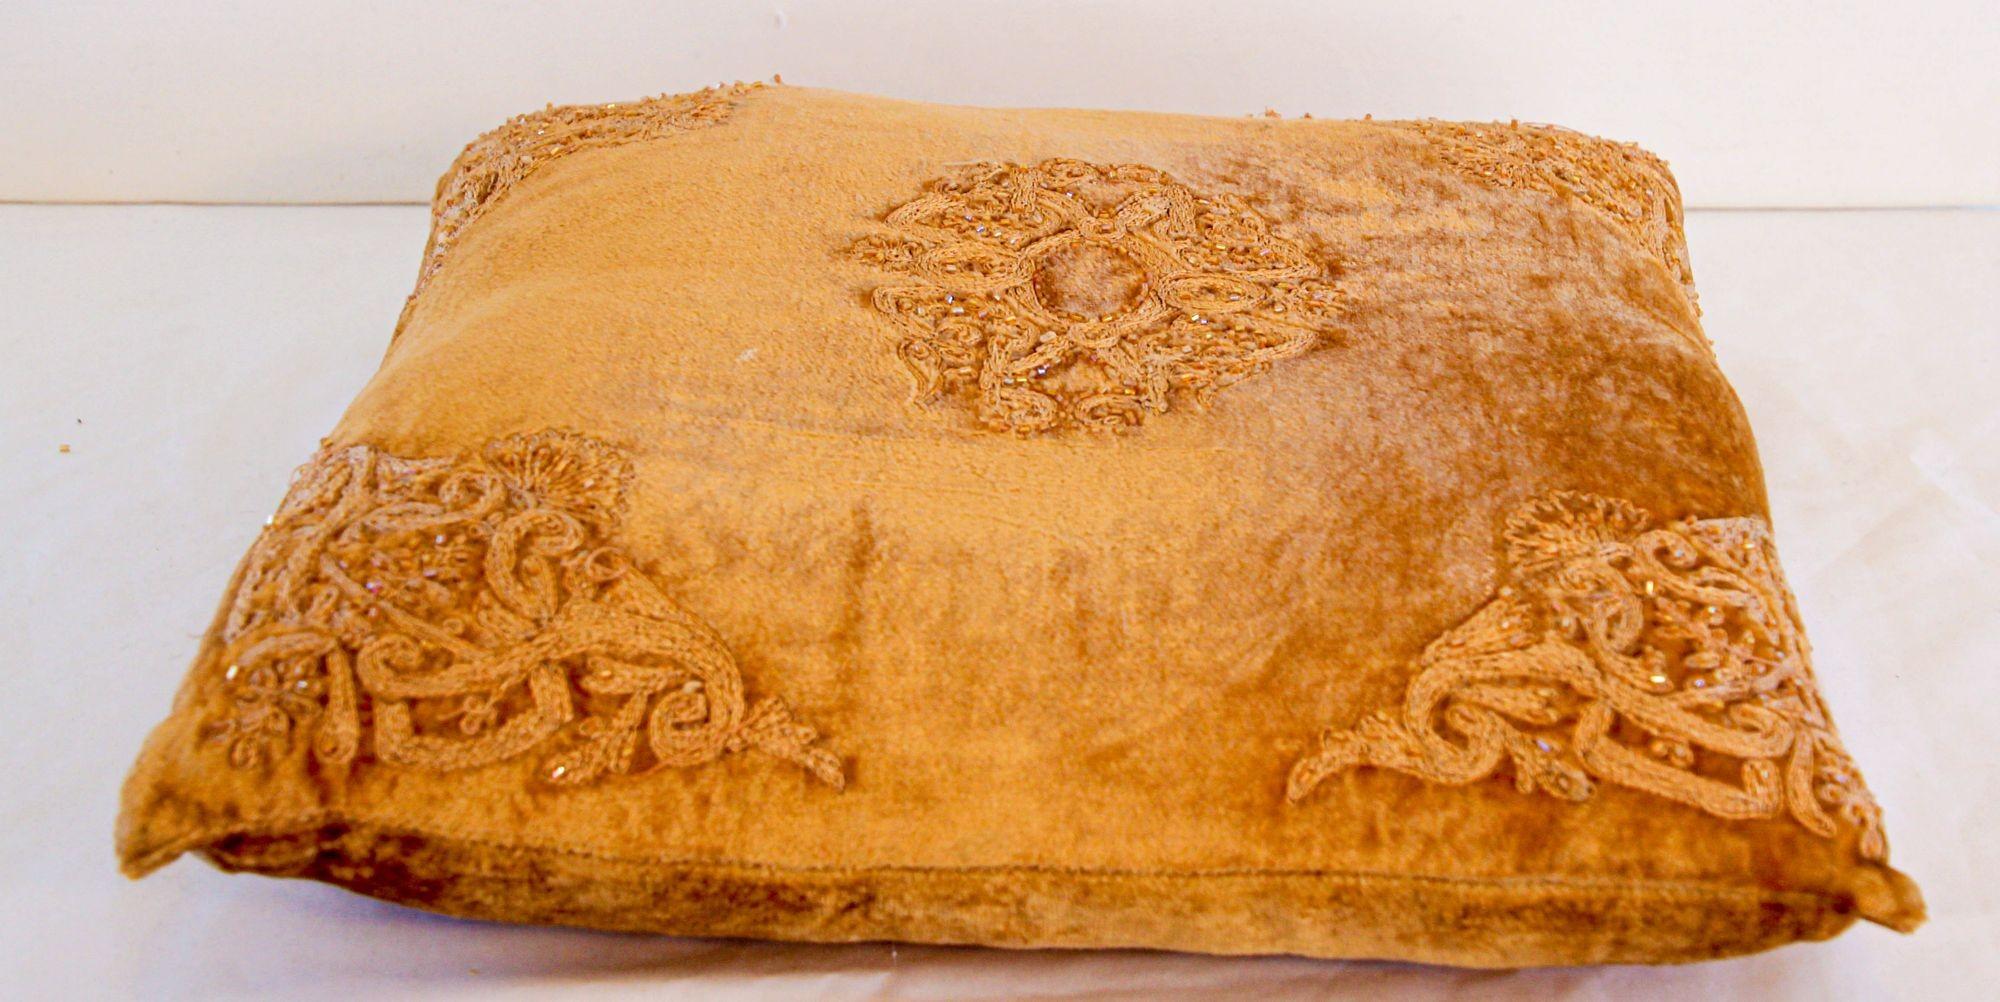 Vintage Velvet Pillow Tan and Gold Color Embroidered in Moorish Designs 4